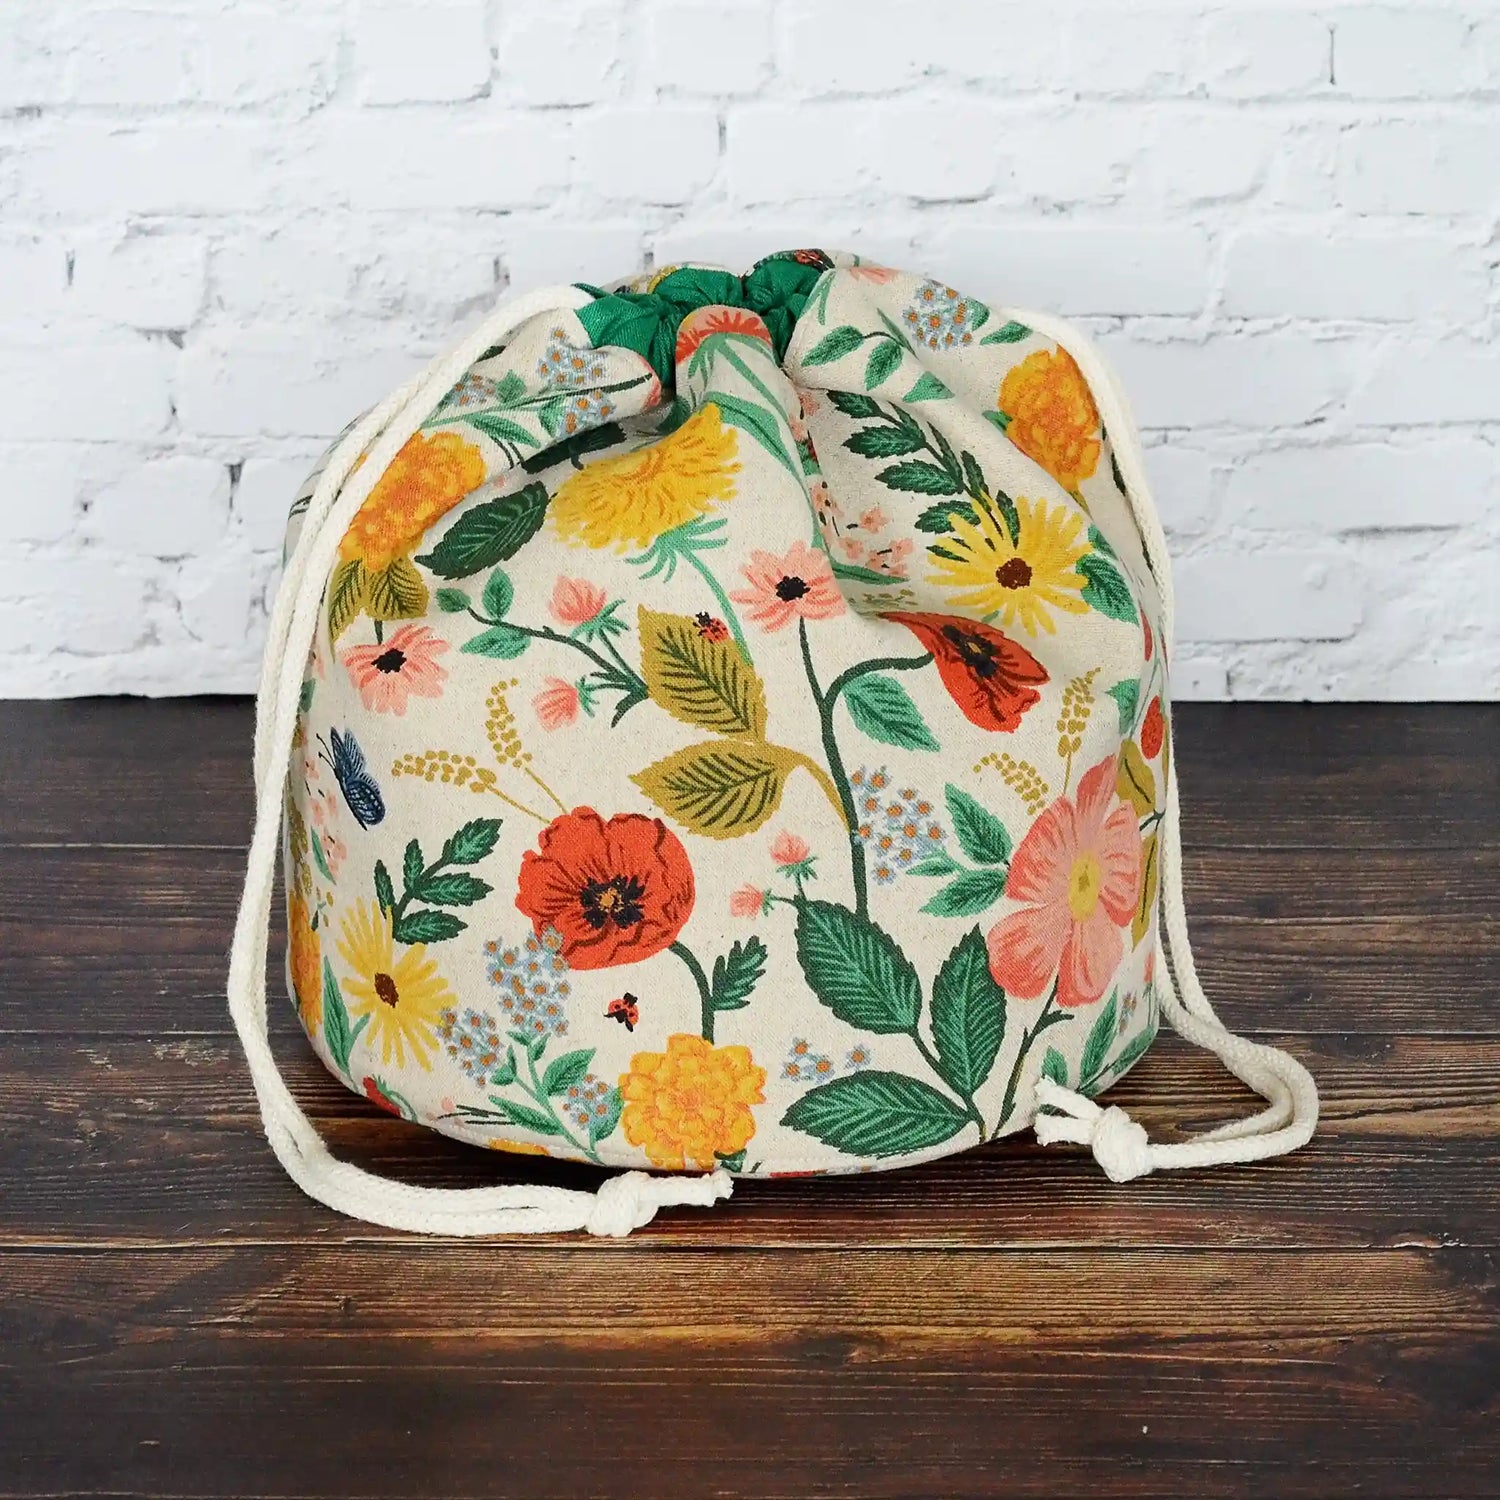 Pretty unbleached floral canvas bucket bag for knitting or crochet.  Made in Nova Scotia by Yellow Petal Handmade.